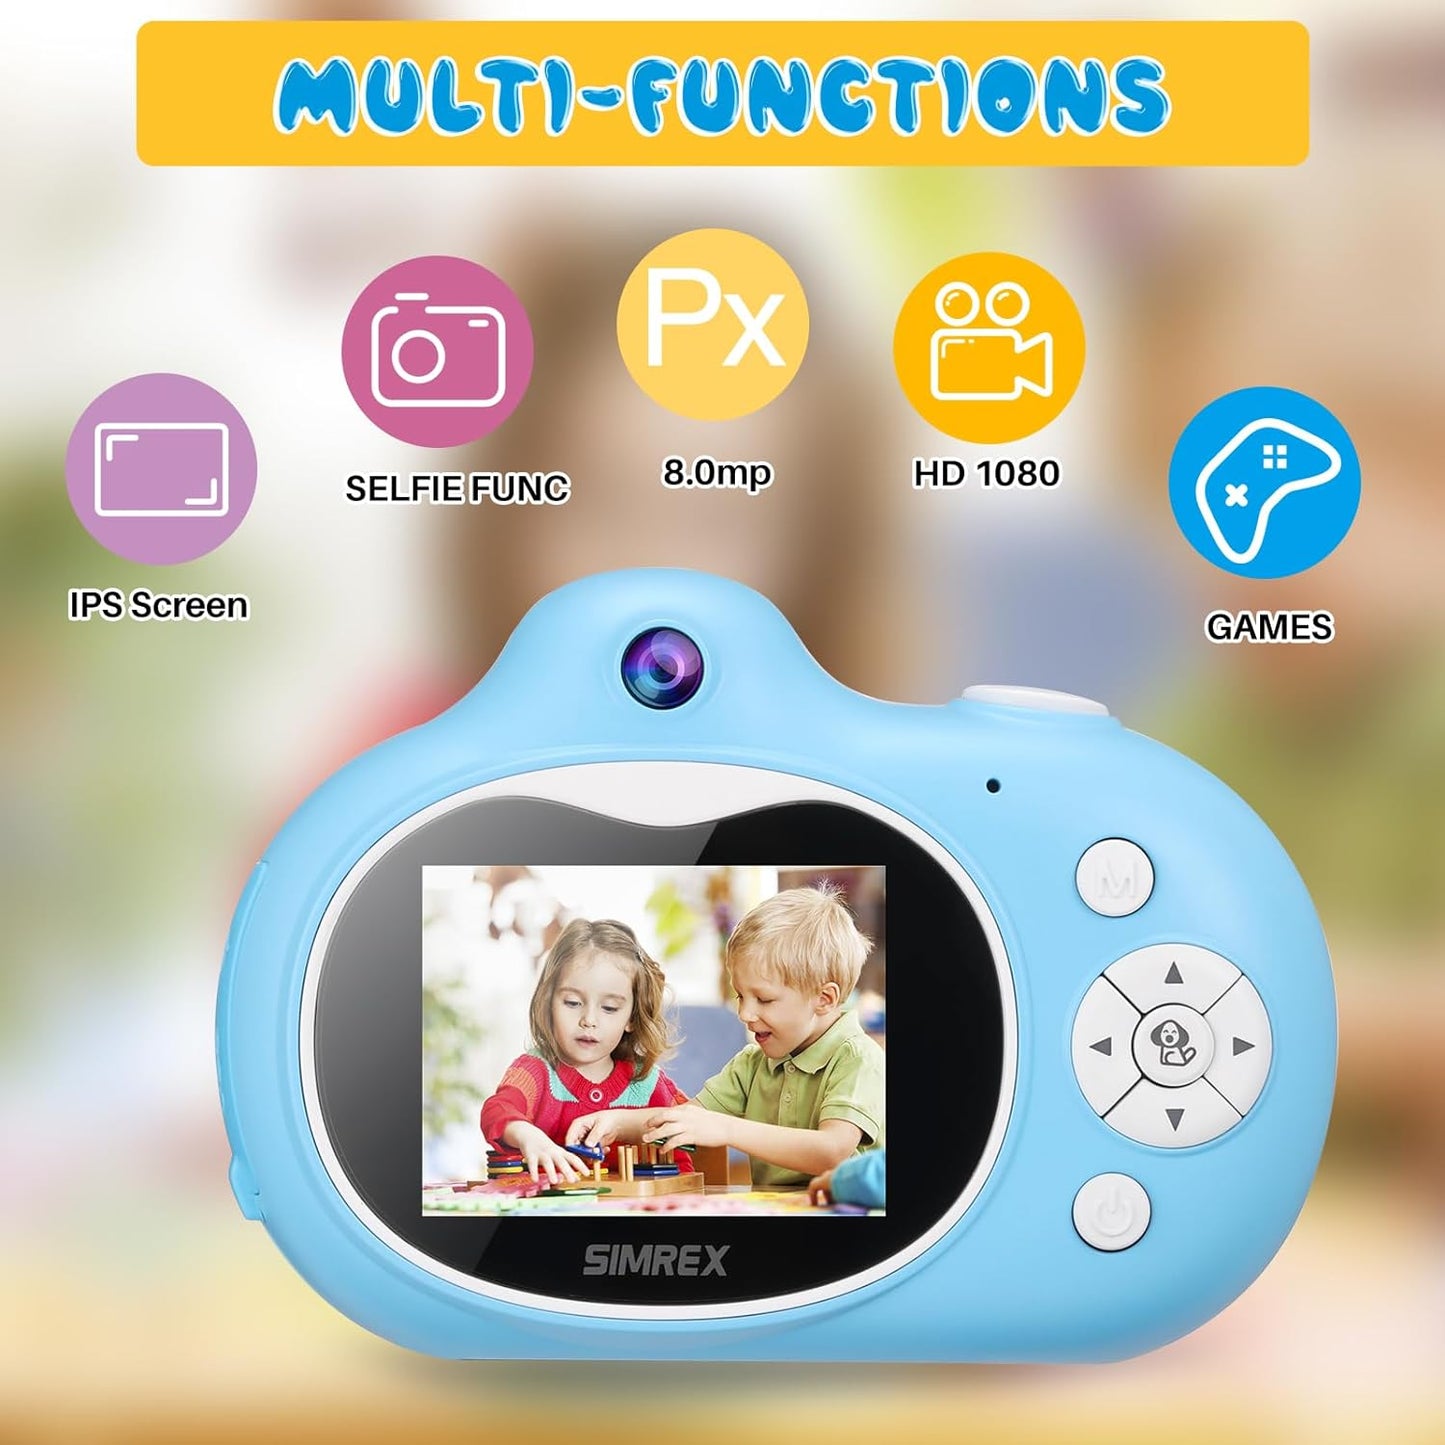 Simrex Kids Camera, Mini Children Digital Camera for Kids Video Camcorder Shockproof Toys with 2.0" IPS HD Screen, Bluetooth Speaker Gift for Child Included 32GB TF Cards